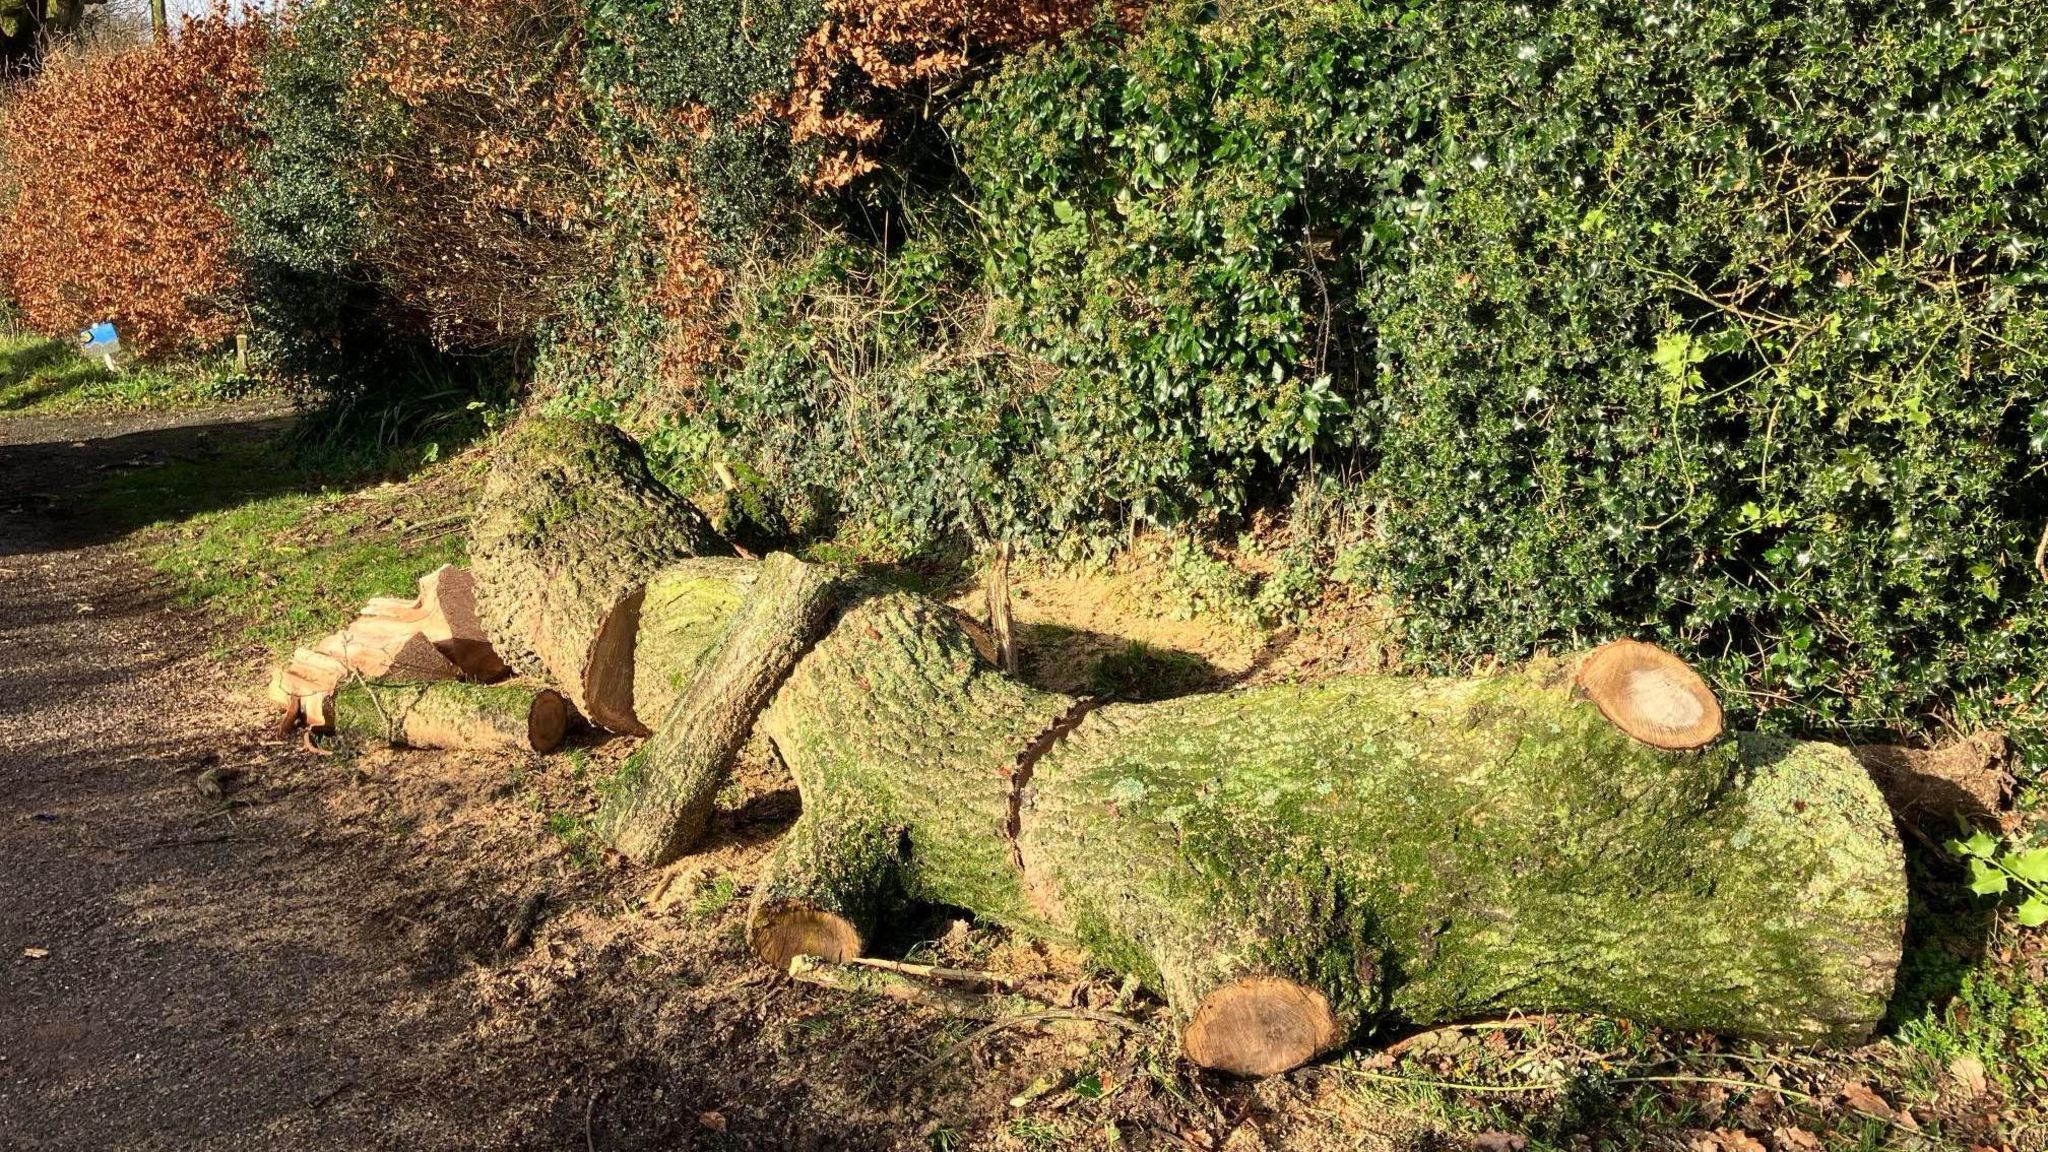 Sections of tree trunk on the ground